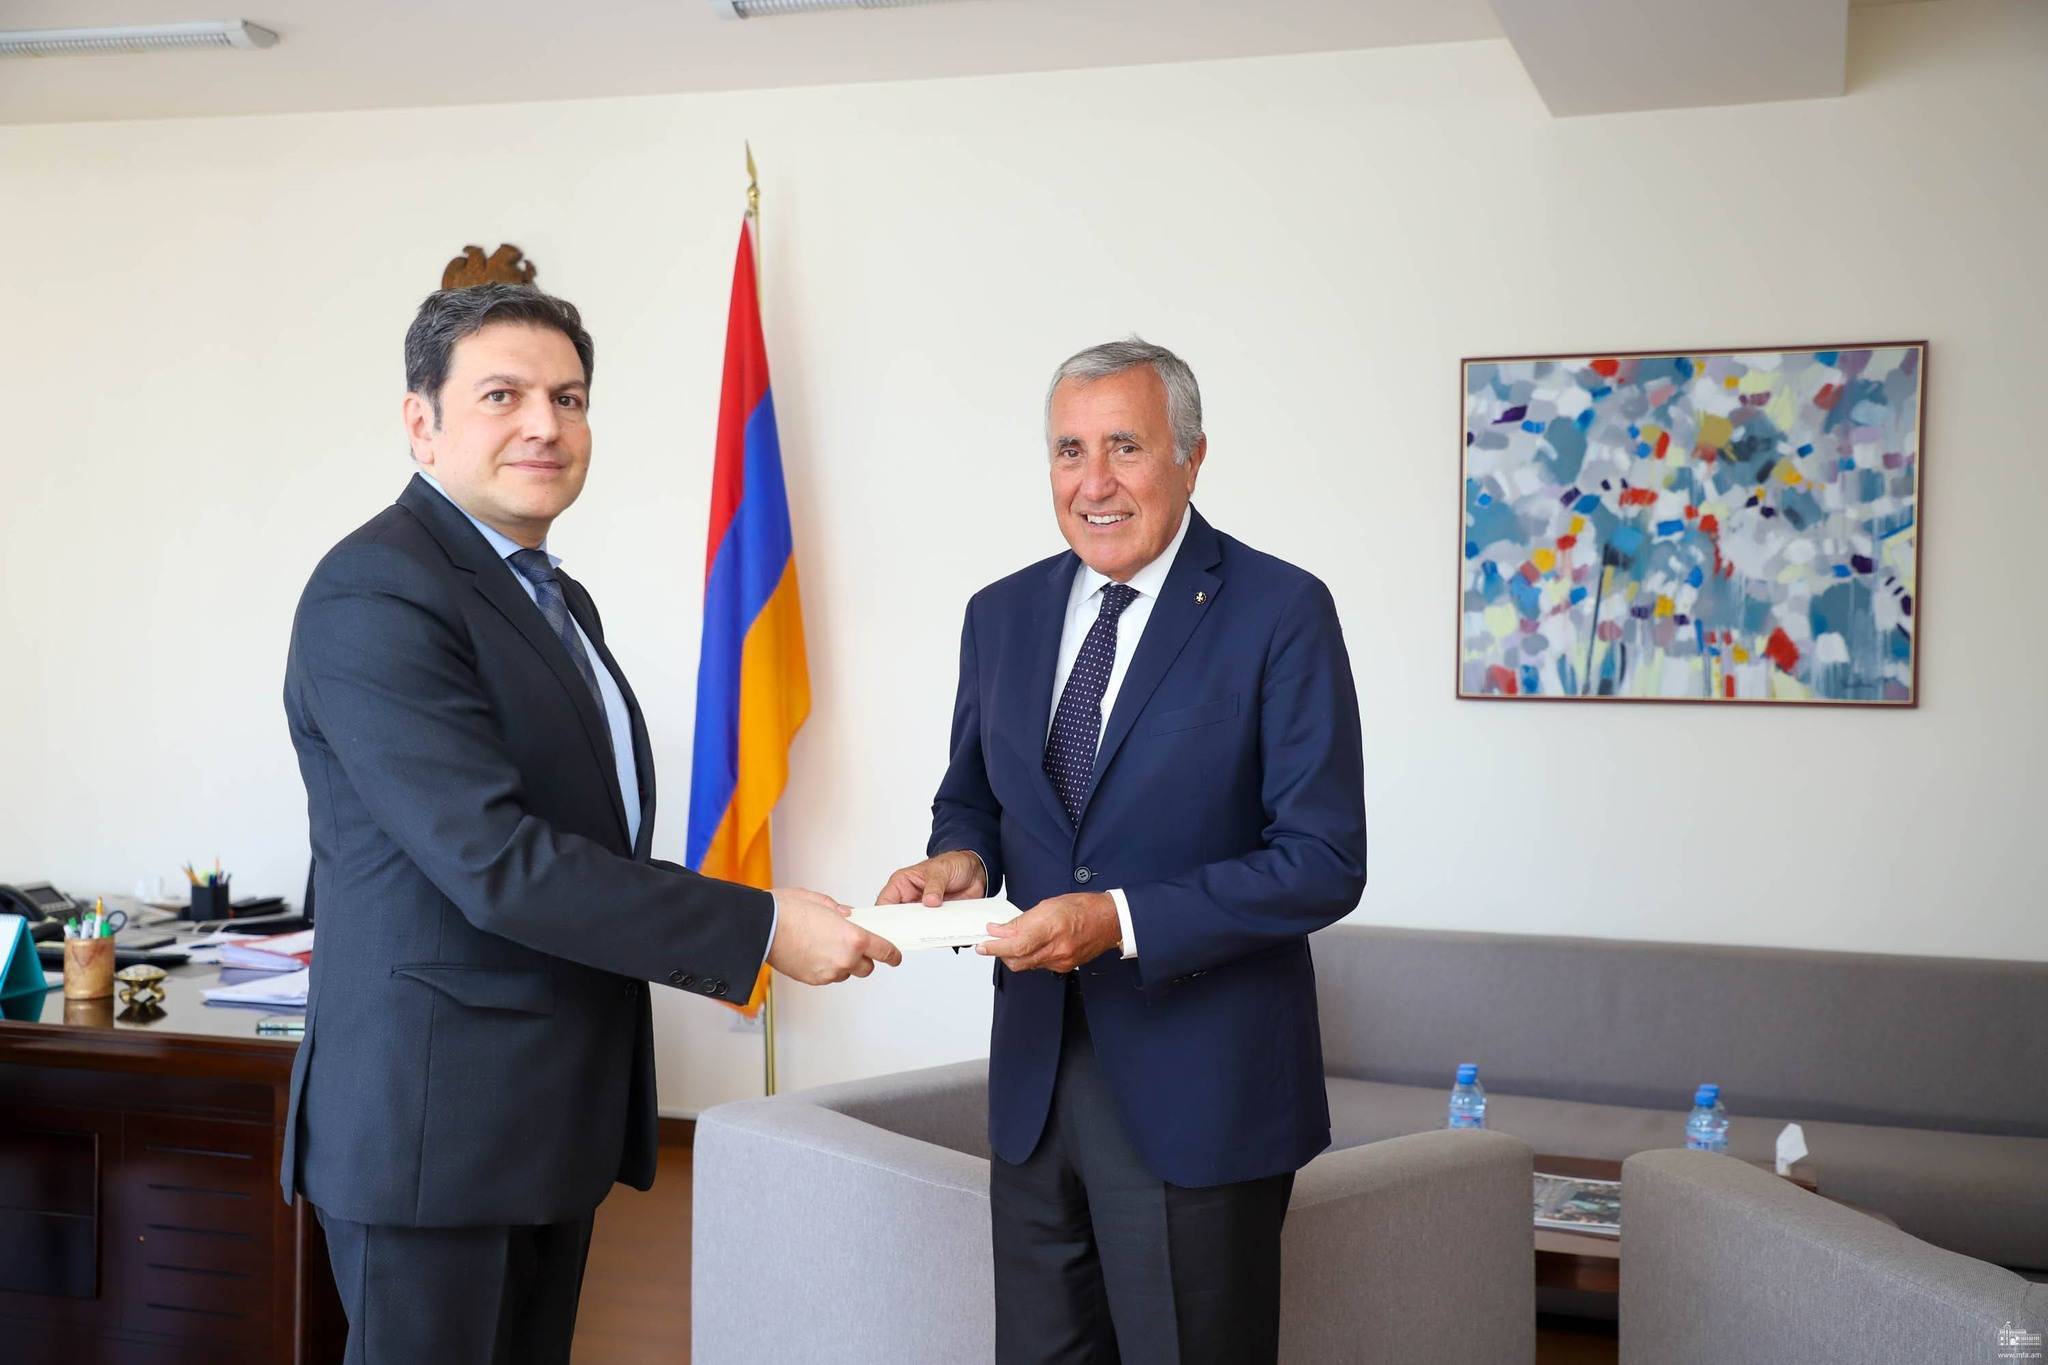 The Ambassador of the Sovereign Order of Malta handed over a copy of his credentials to the Deputy Minister of Foreign Affairs of the Republic of Armenia